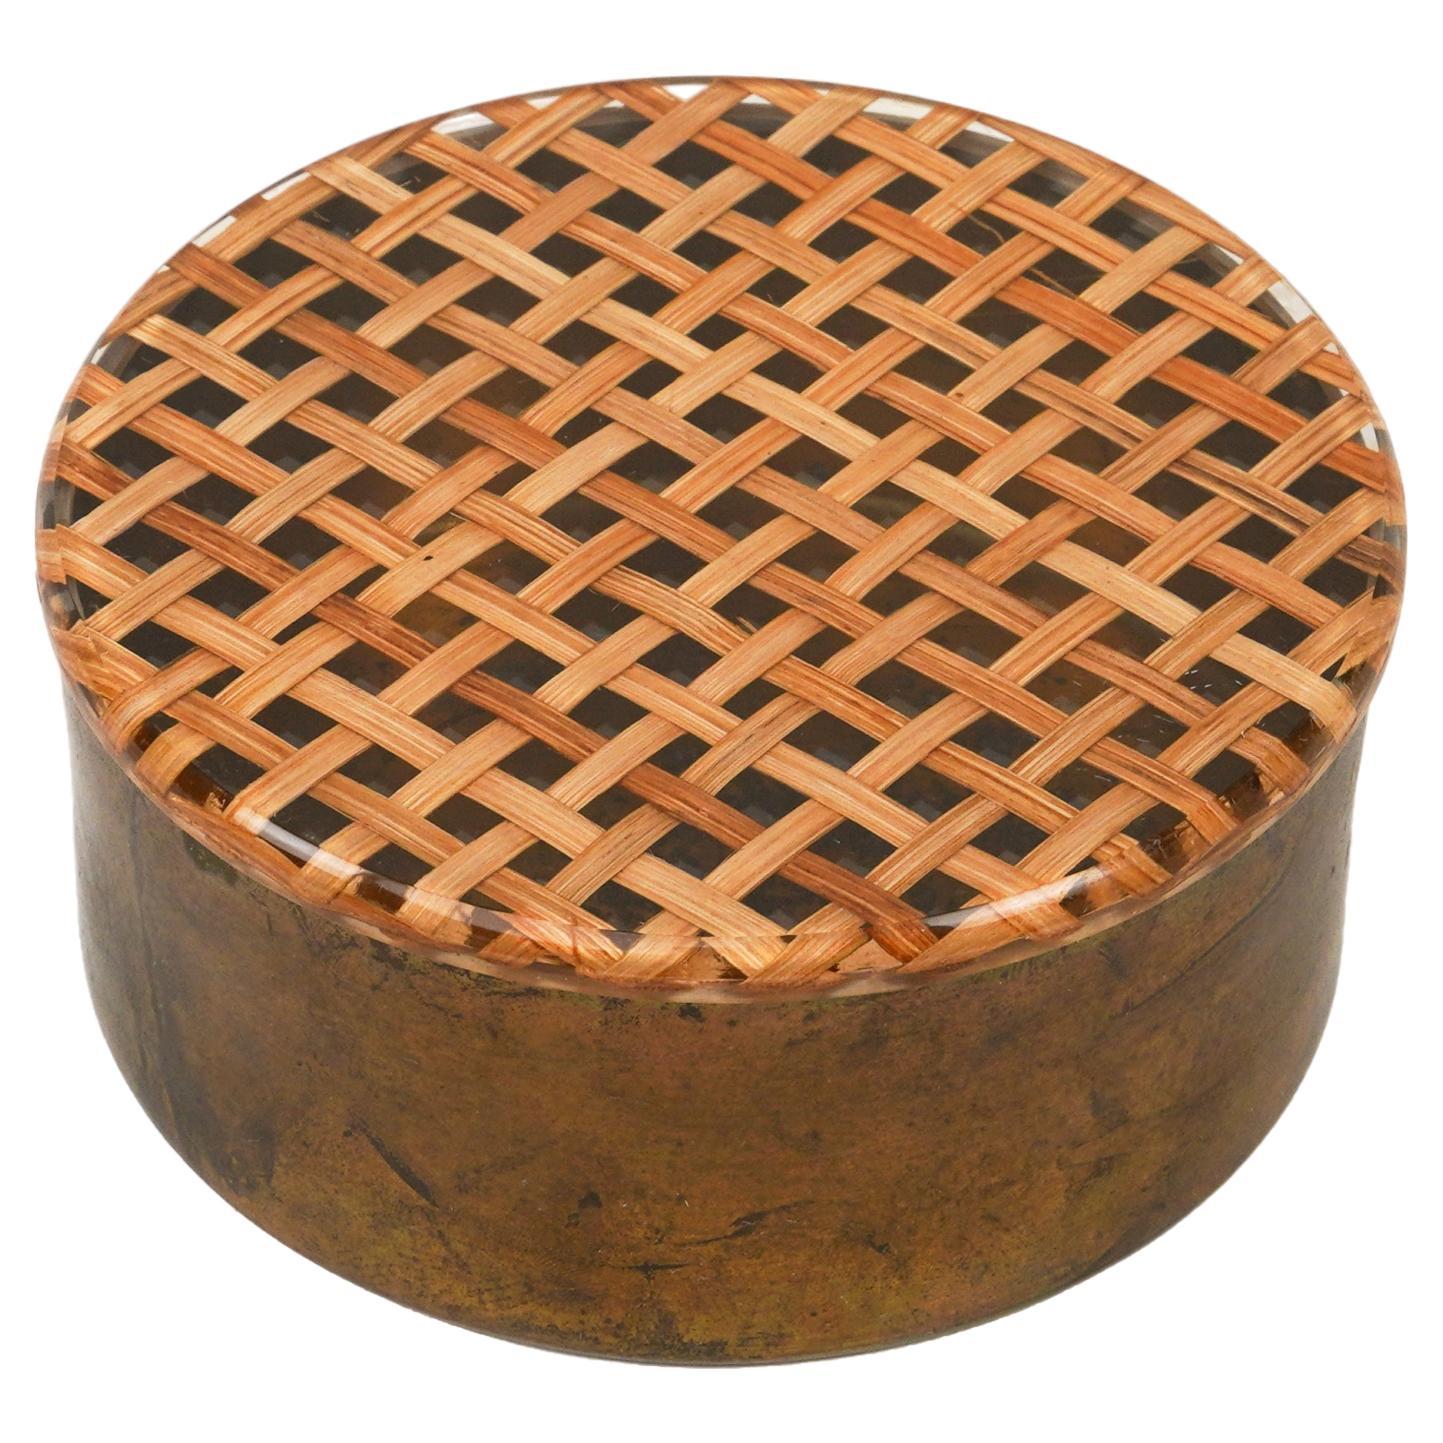 Midcentury Round Box in Brass, Lucite & Rattan Christian Dior Style, Italy 1970s For Sale